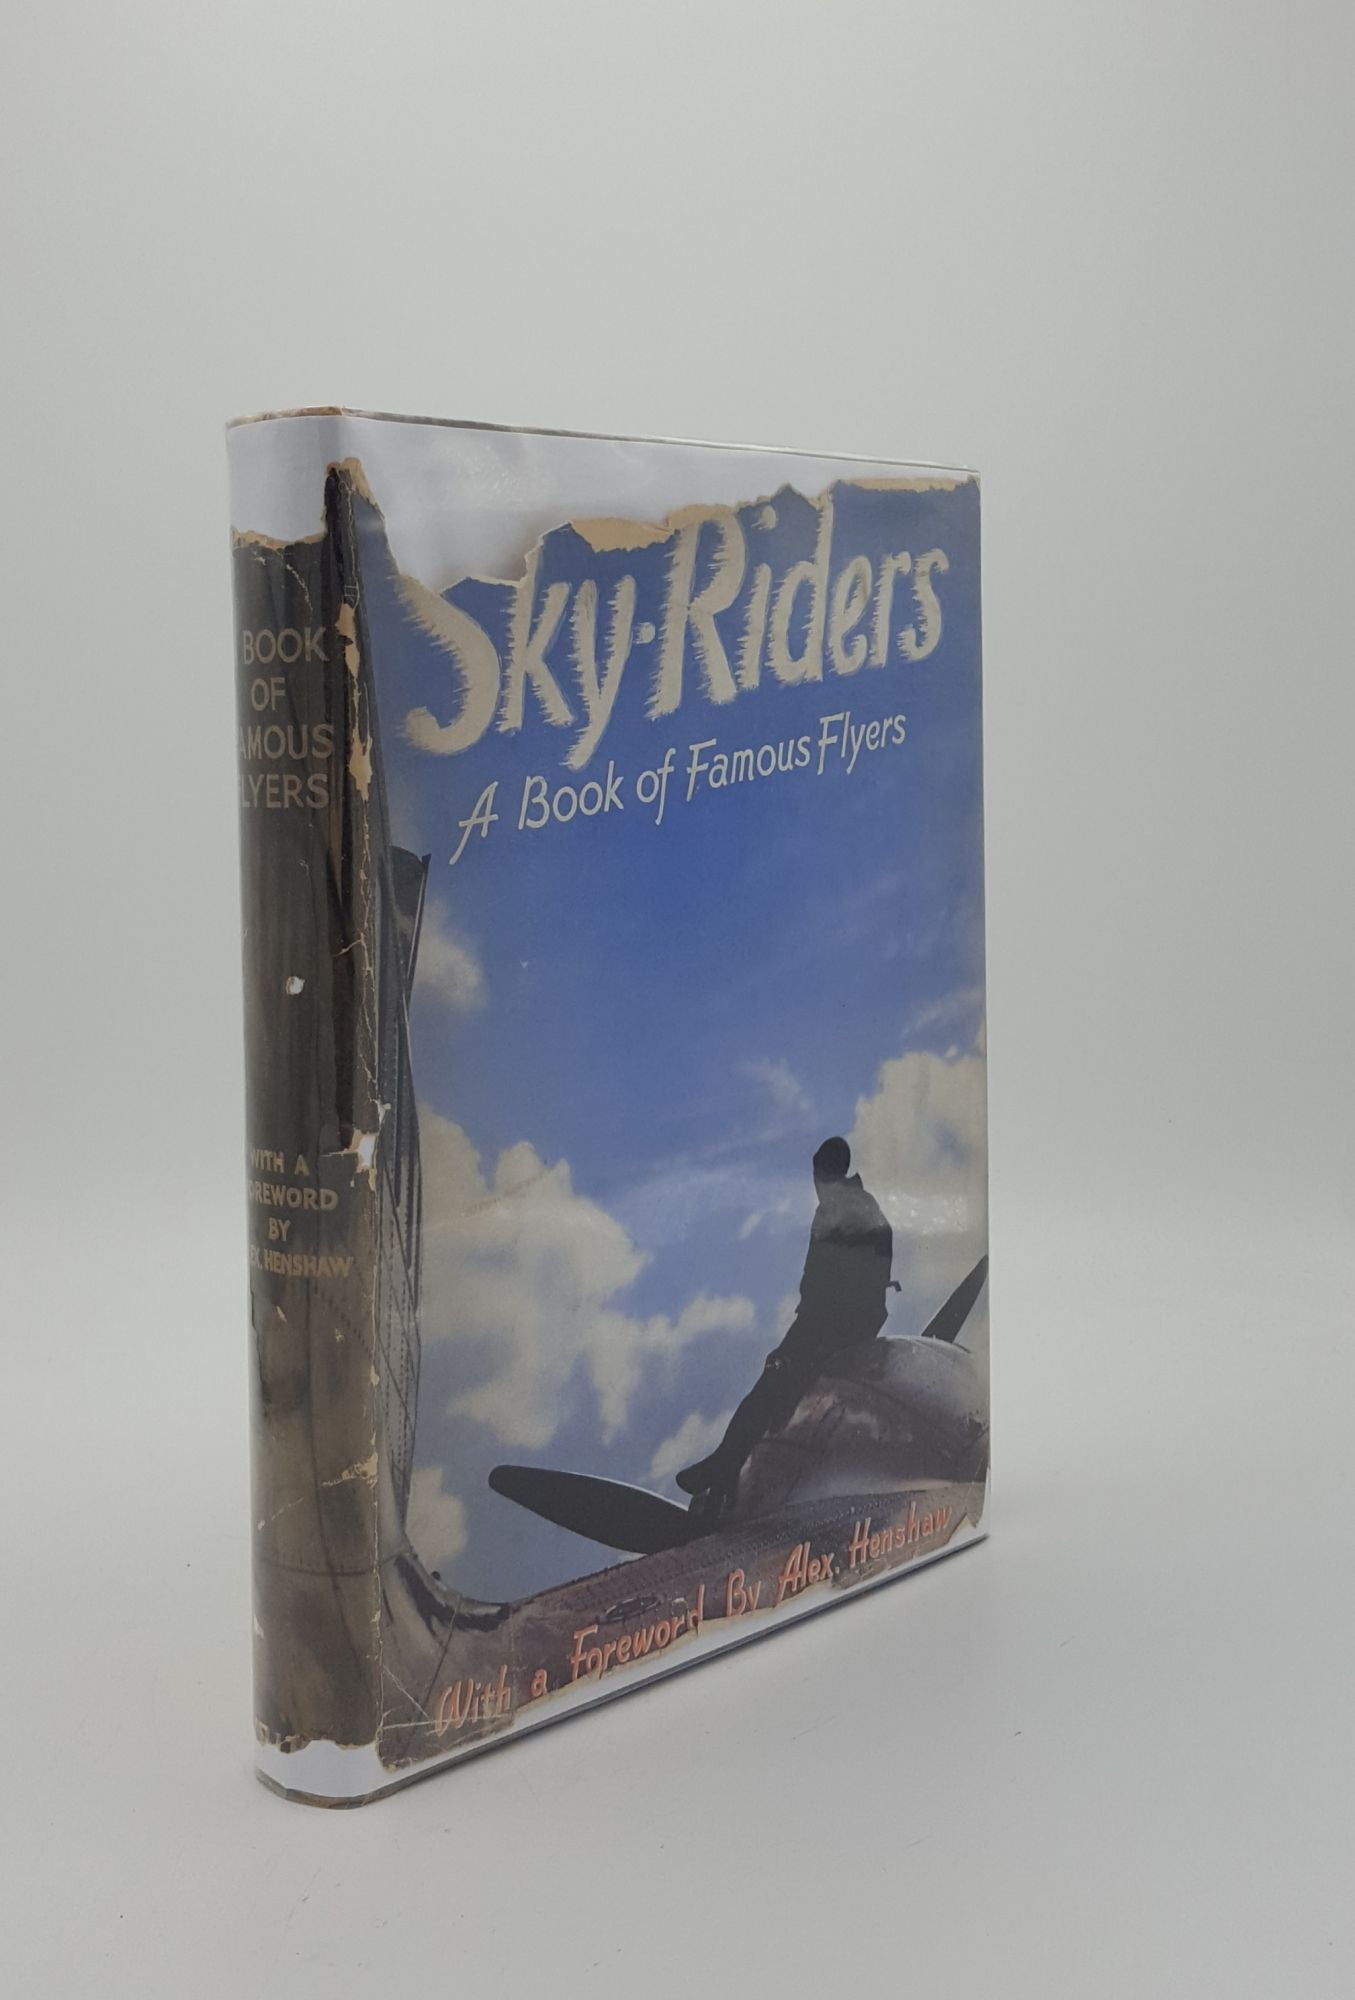 HENSHAW Alex - Sky-Riders a Book of Famous Flyers